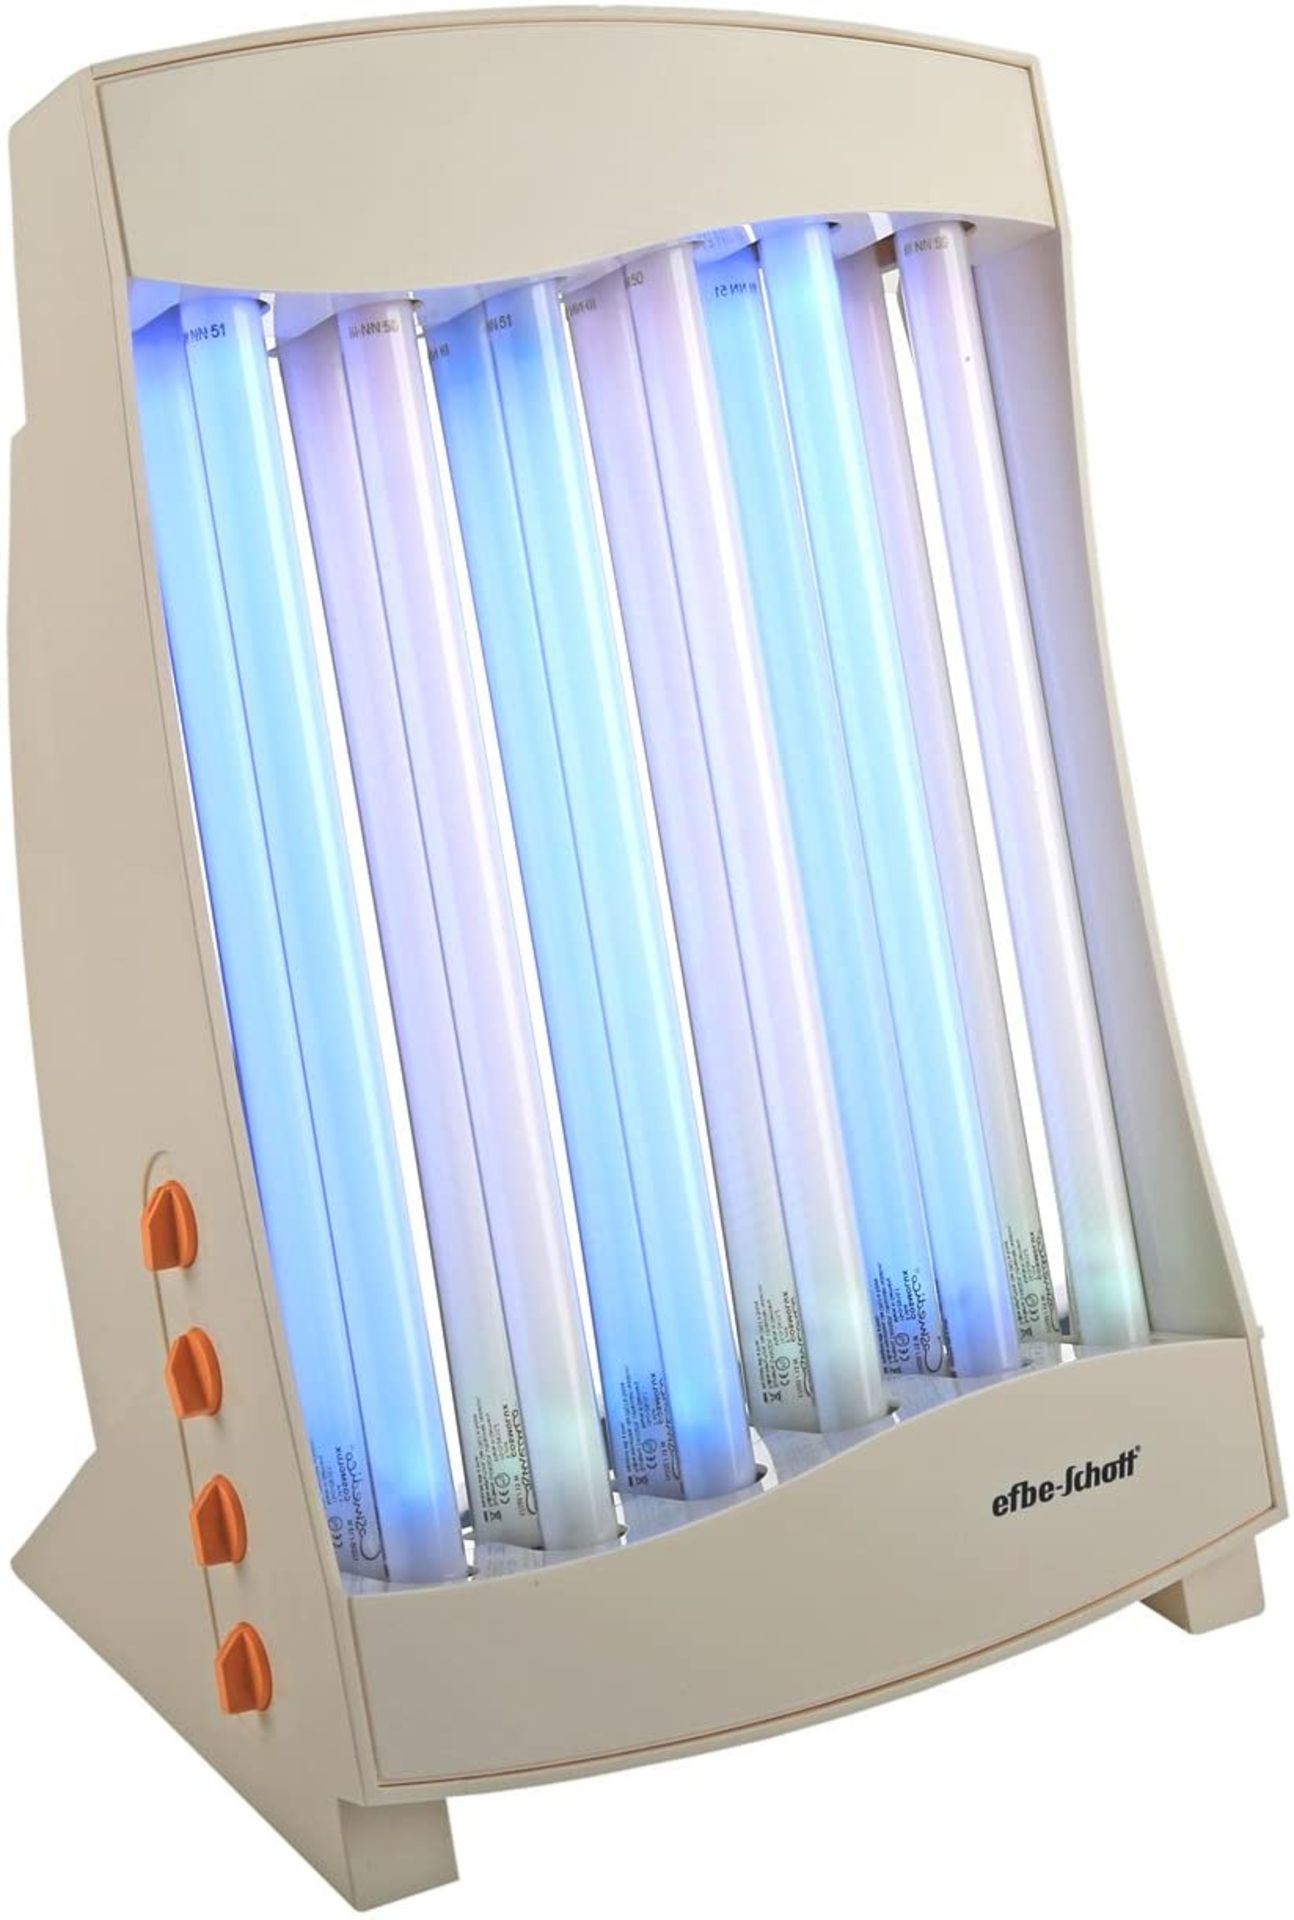 RRP £125-Efbe-Schott Wellness Face Lamp with 6 Tubes, 105 W, Includes 2 Protective Eye Goggles, Peac